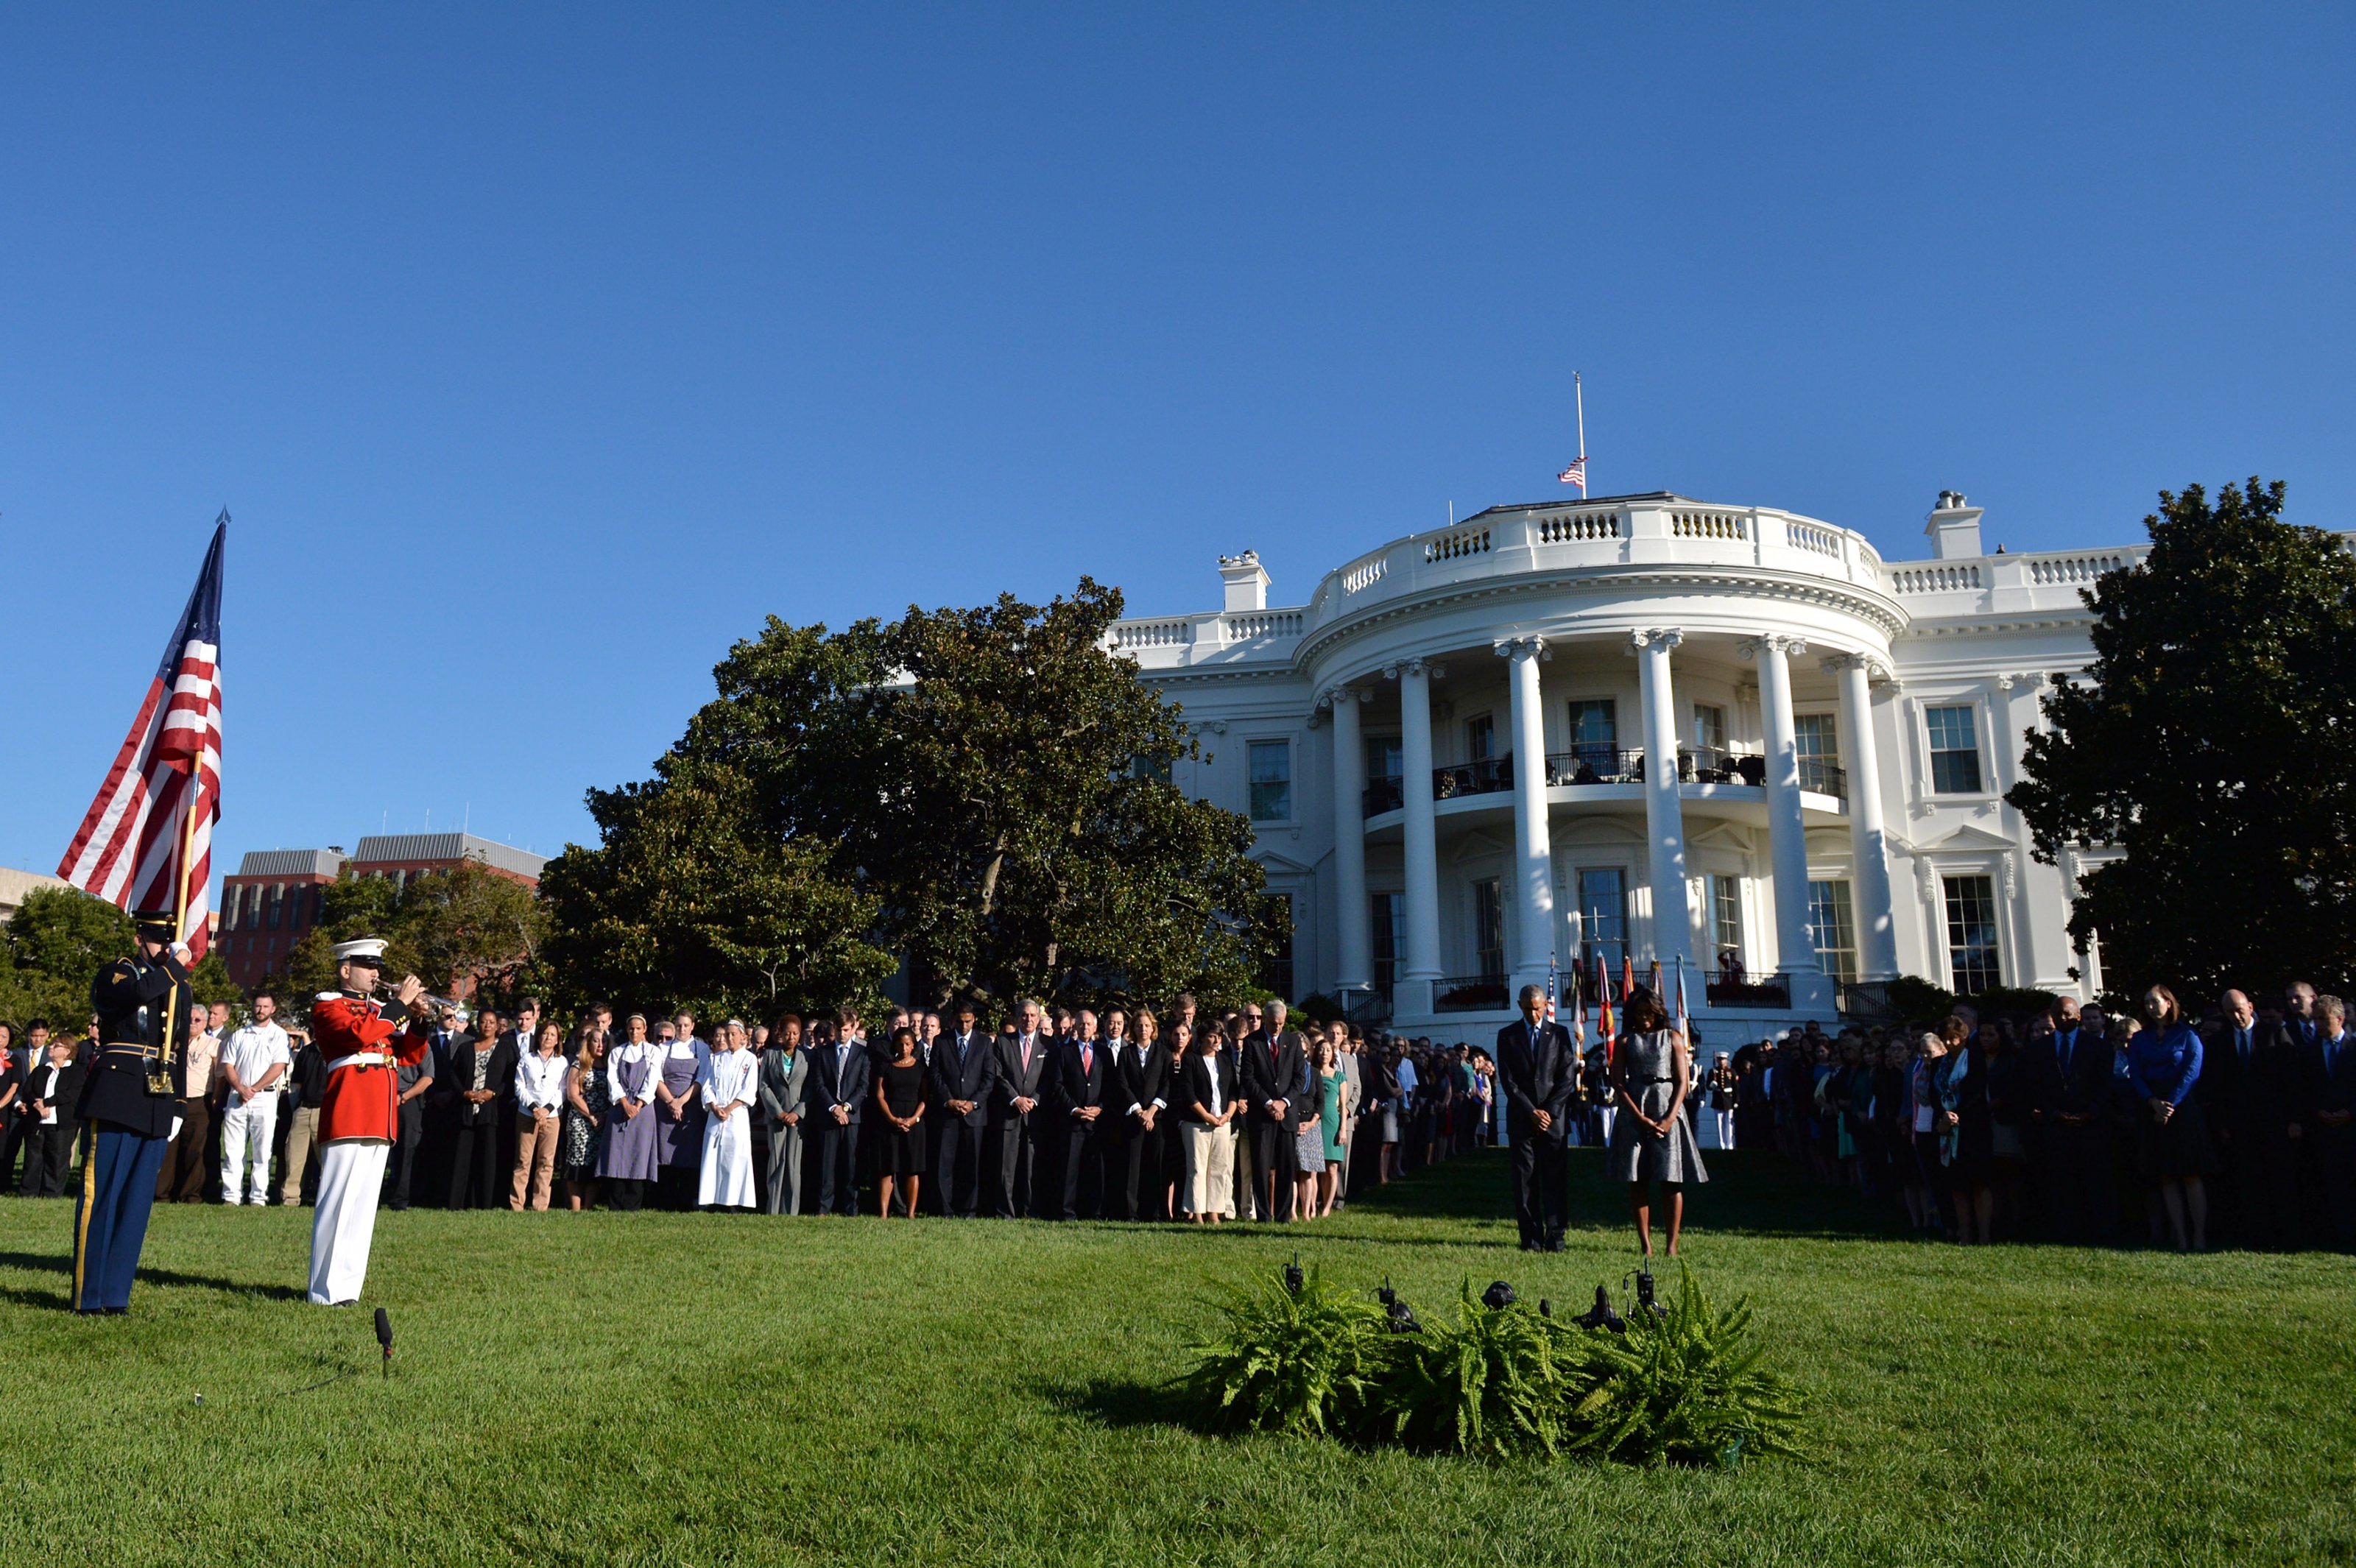 President Barack Obama and First Lady Michelle Obama, joined by White House staff, participate in a moment of silence on the 14th anniversary of the September 11 terrorist attacks on the United States, at the White House in Washington, D.C. on September 11, 2015. Photo by Kevin Dietsch/UPI/ABACAPRESS.COM